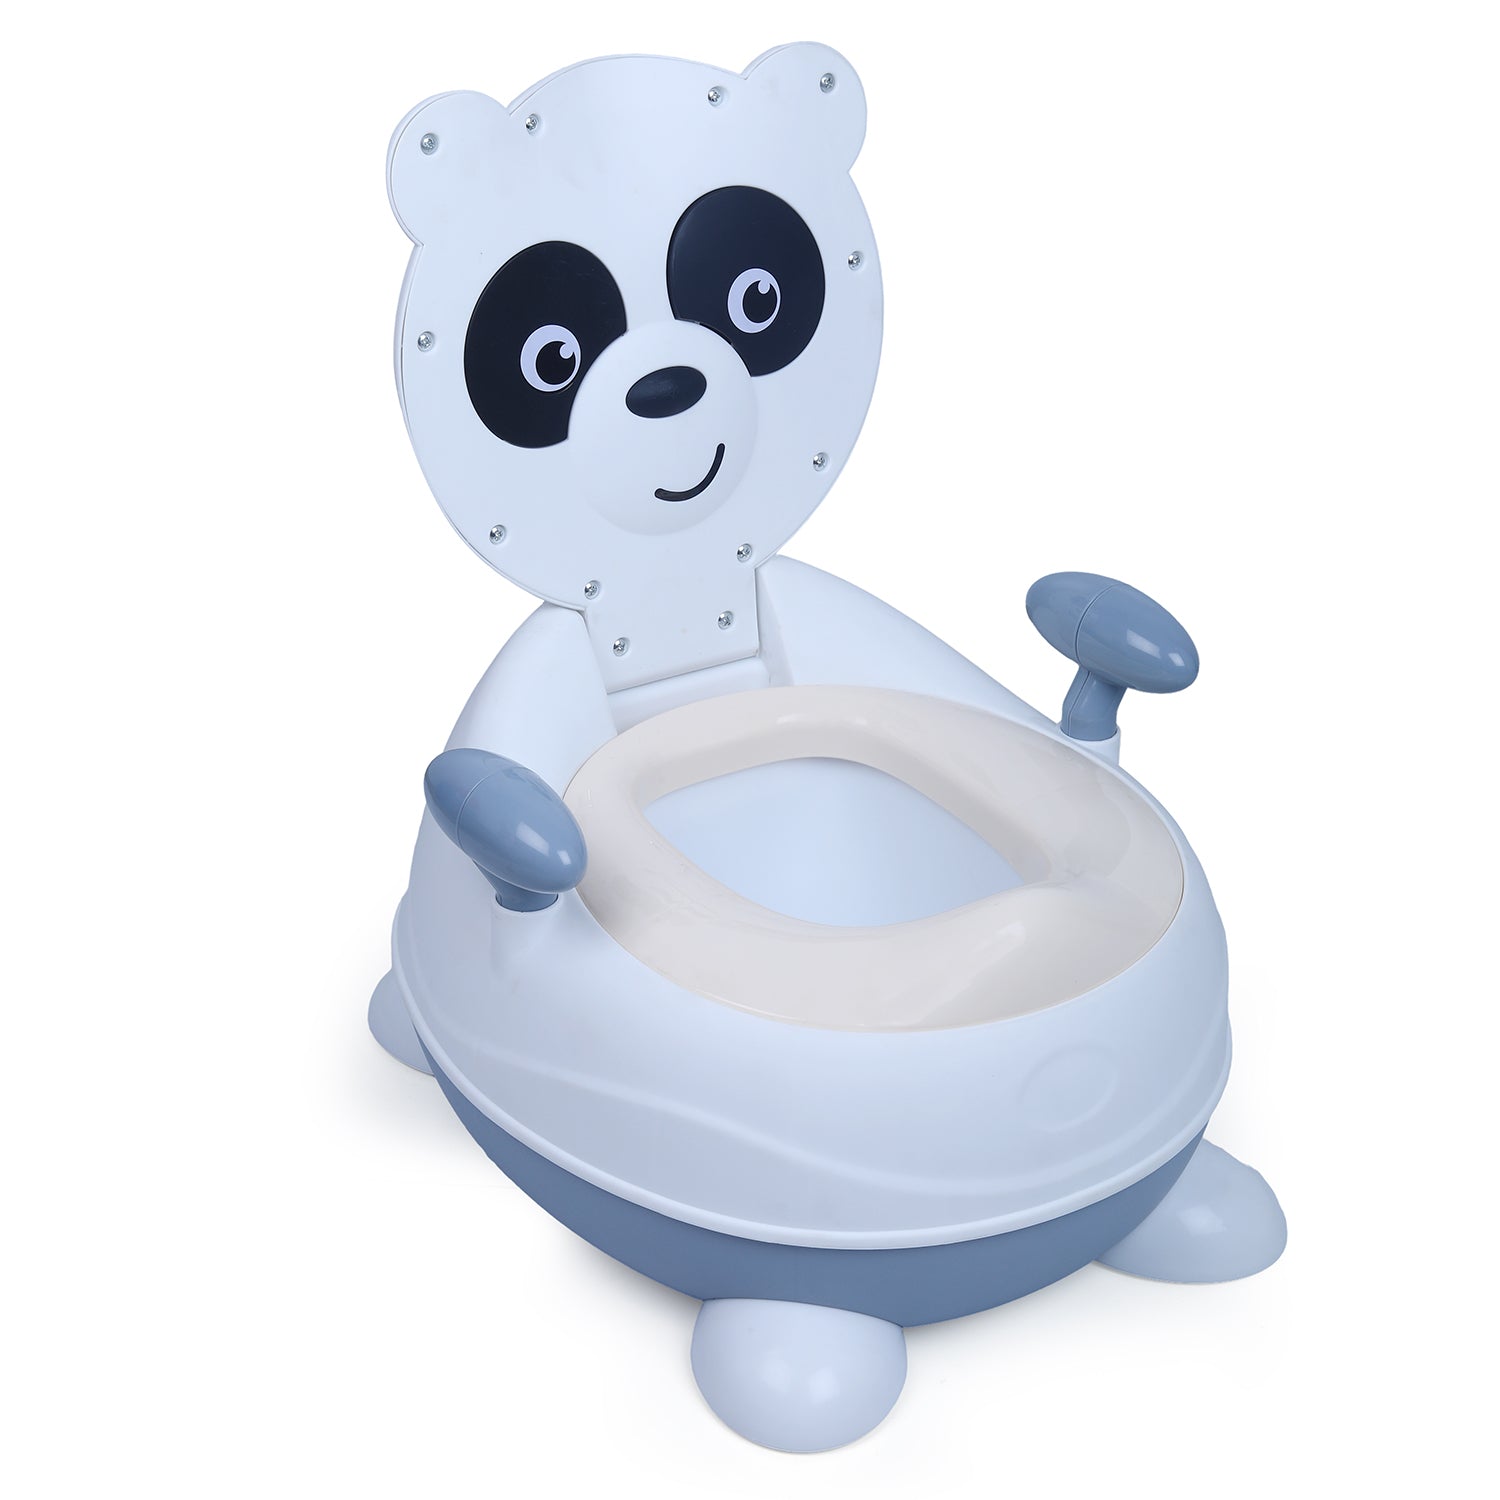 Baby Moo Panda Detachable Lid With Handle For Toilet Training Potty Chair - White